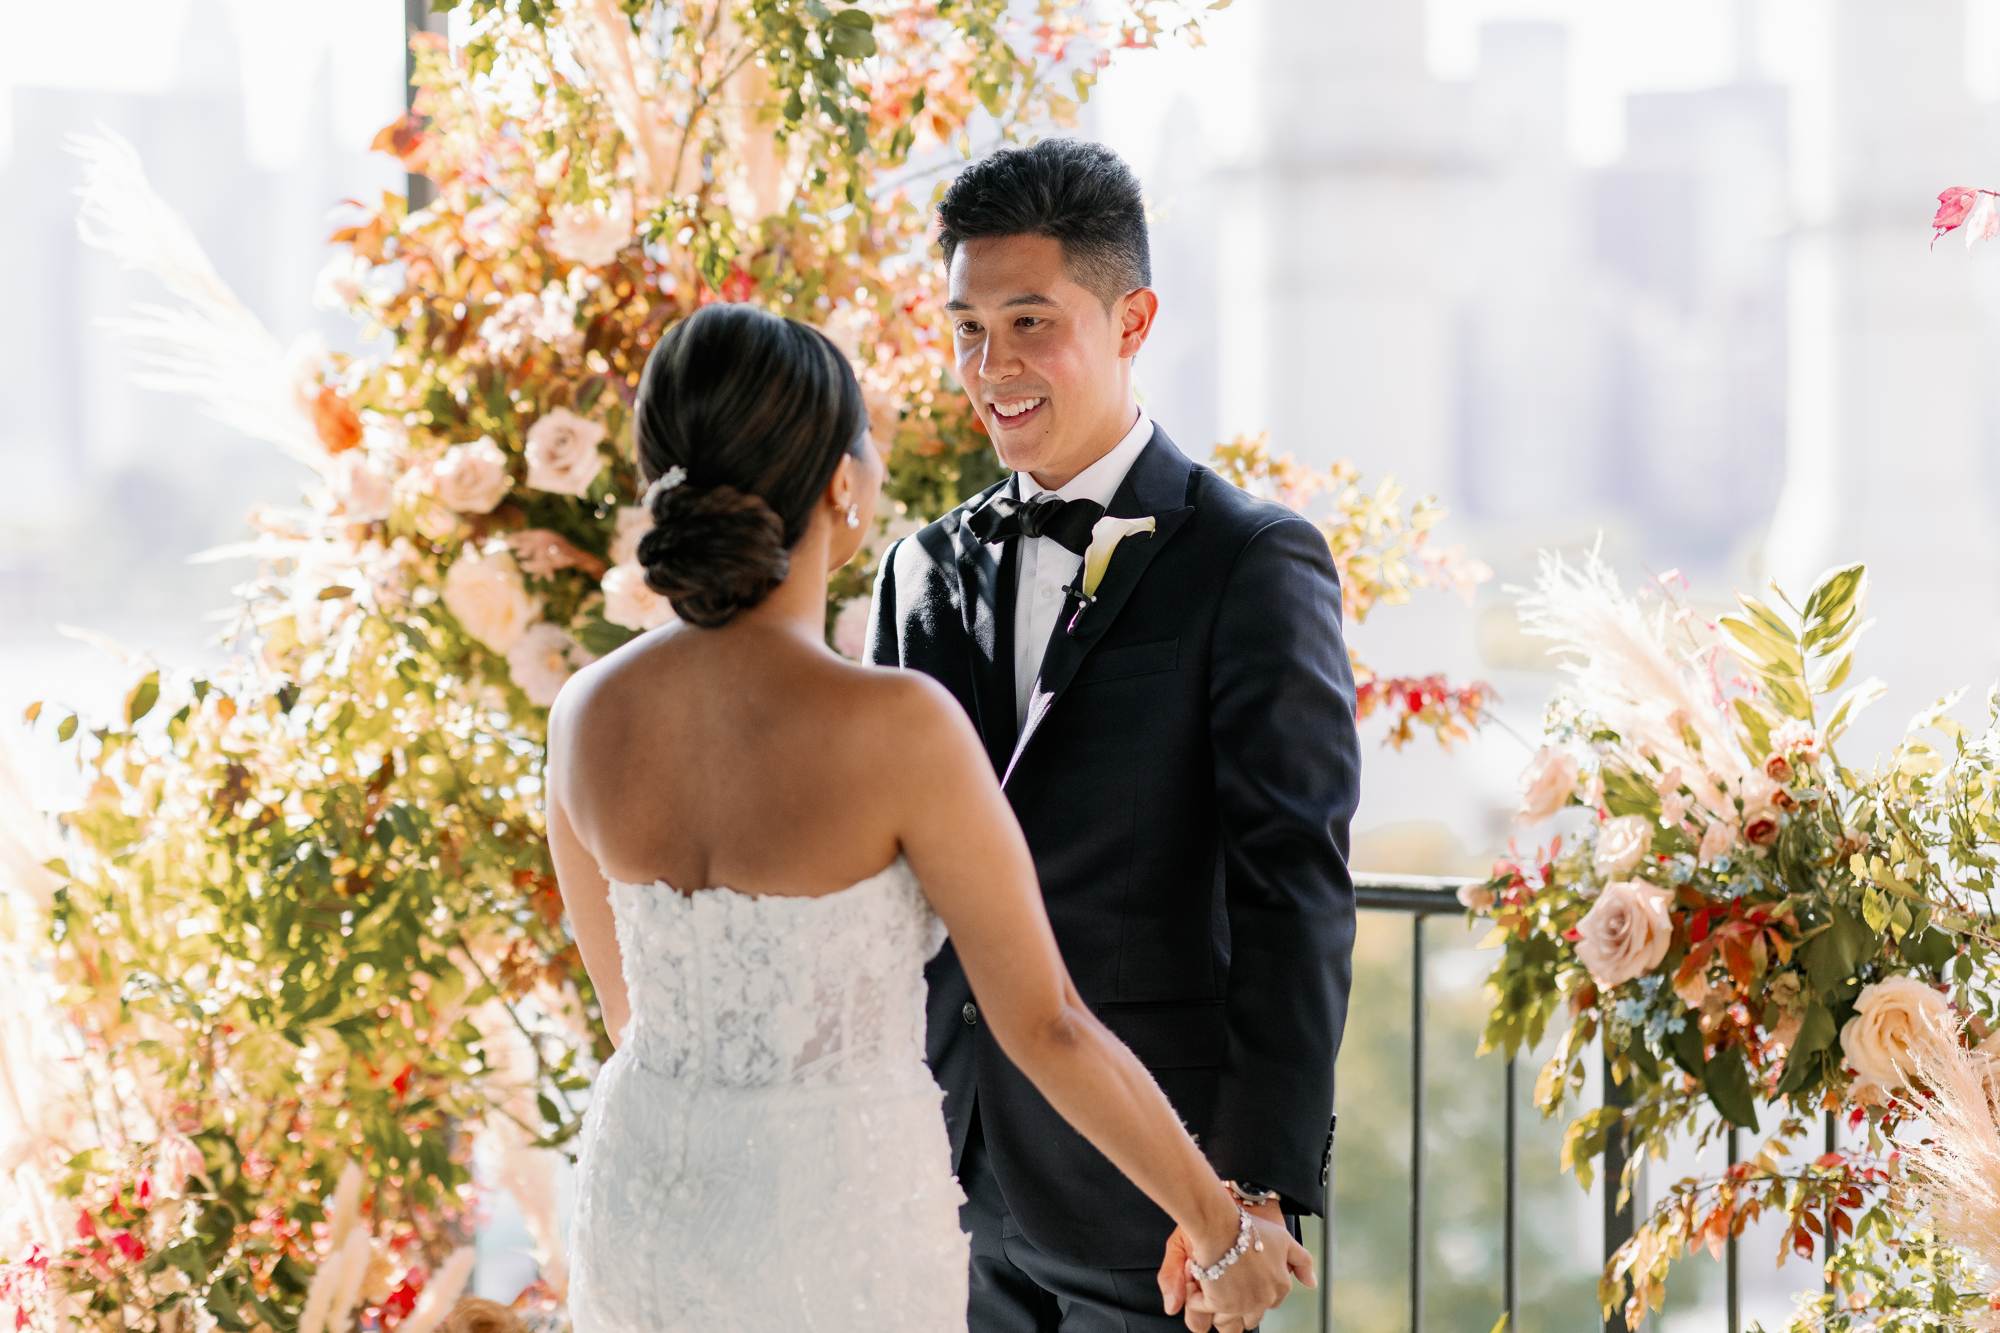 Ravel Hotel wedding in LIC with floral arch